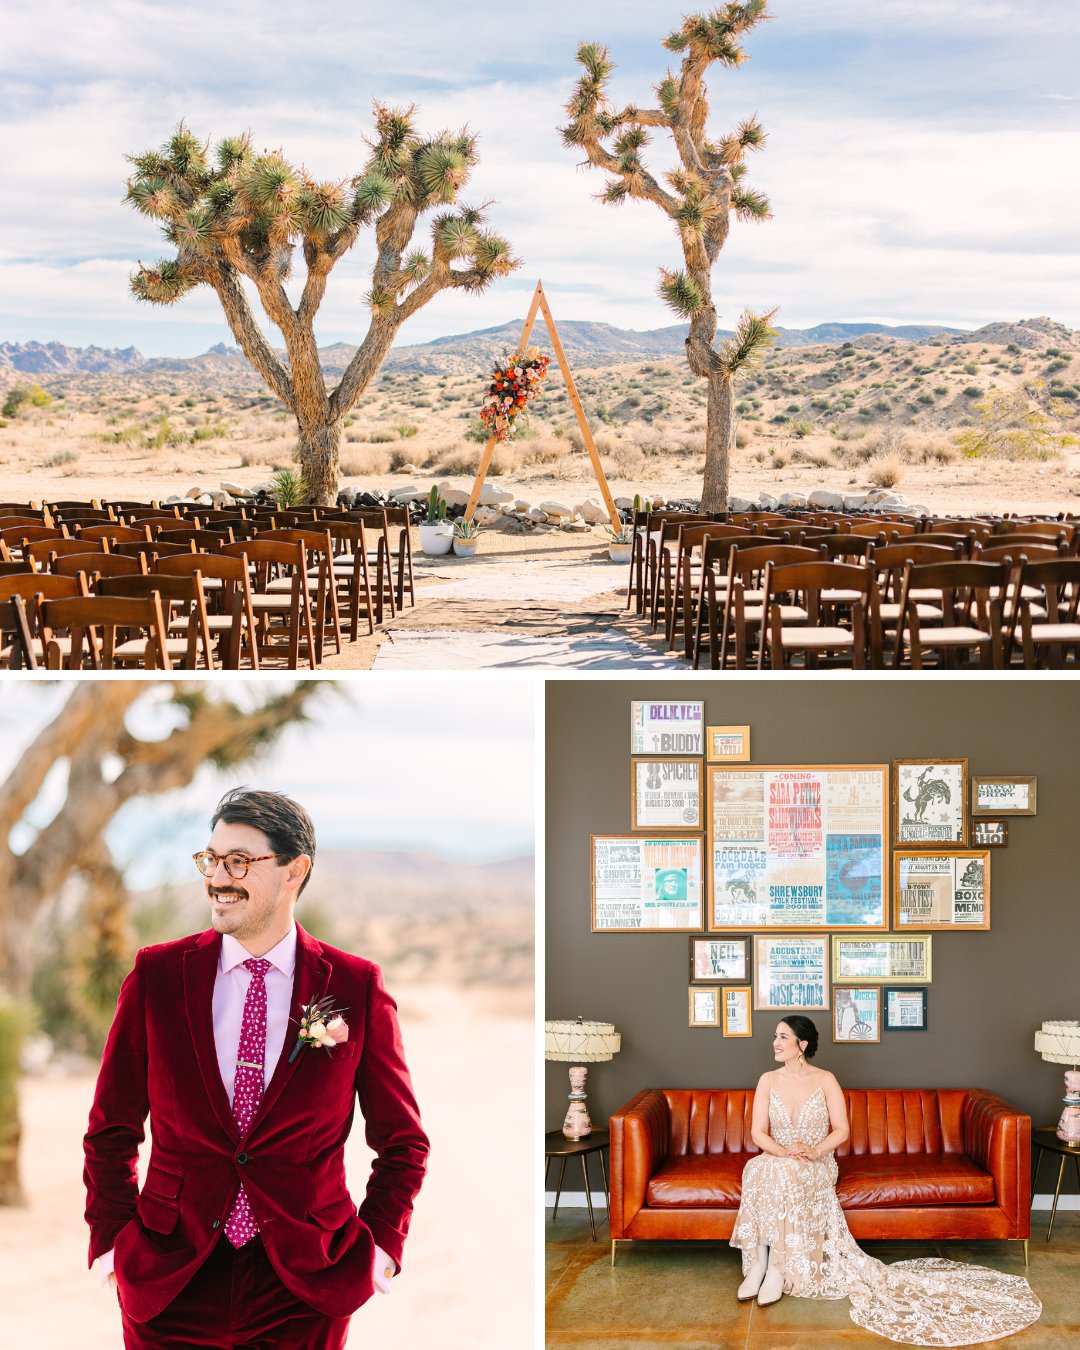 A beautiful desert wedding ceremony setup behind a Joshua Tree with a stunning mountain backdrop, groom poses in red velvet suit, bride sits in lacy dress on red couch